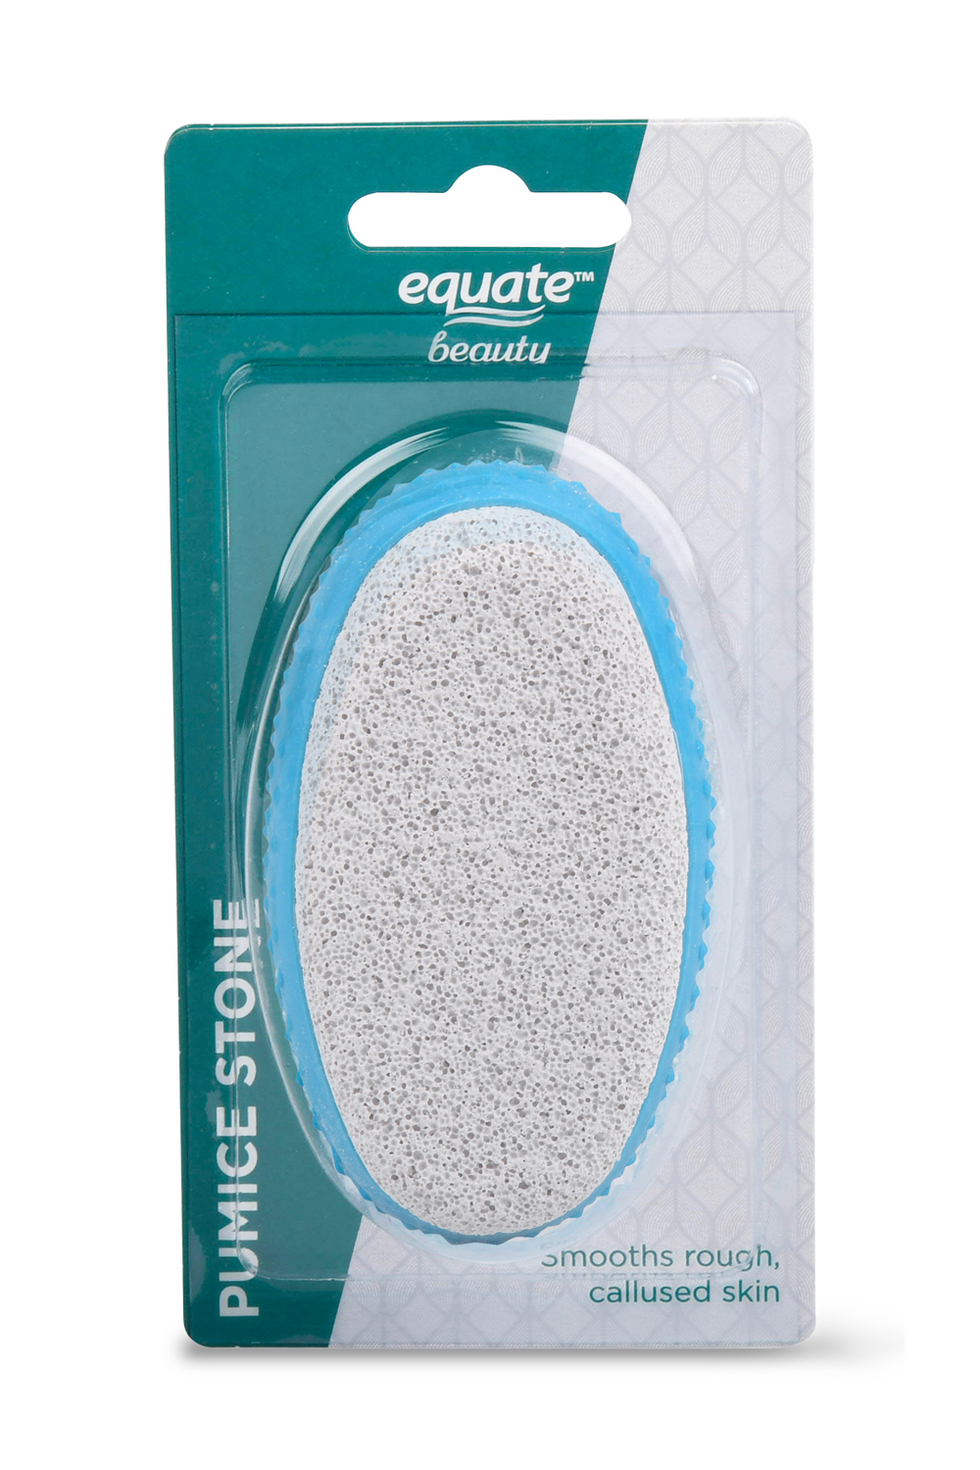 Equate Beauty Oval-Shaped Foot Pumice Stone with Grip Massager